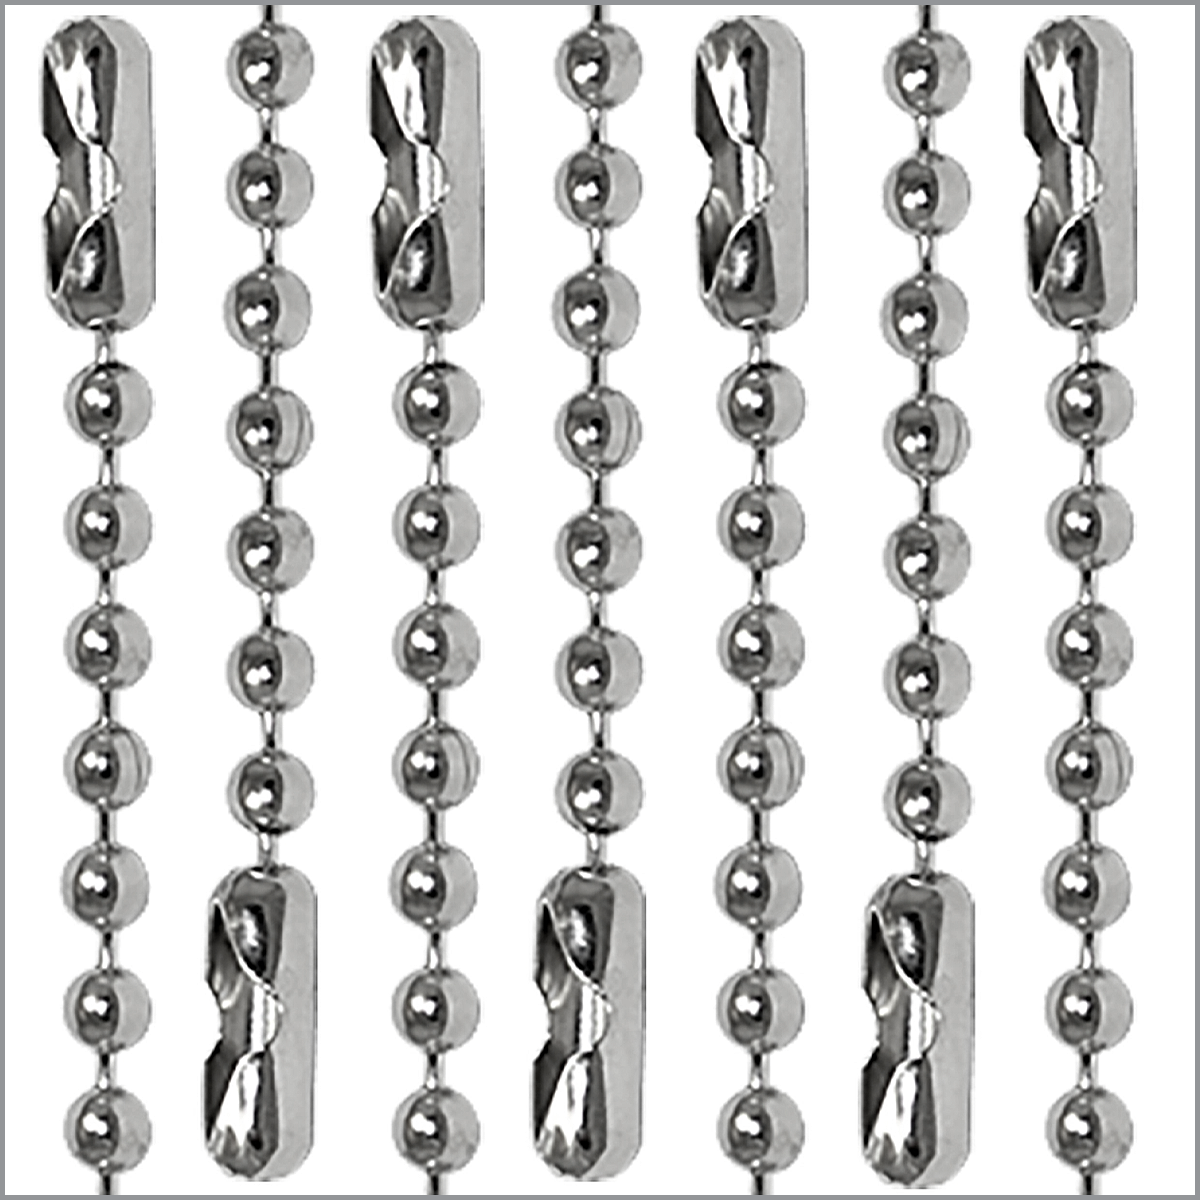 #3 Nickel Plated Steel Ball Chains with Connector - 12 Inch Length